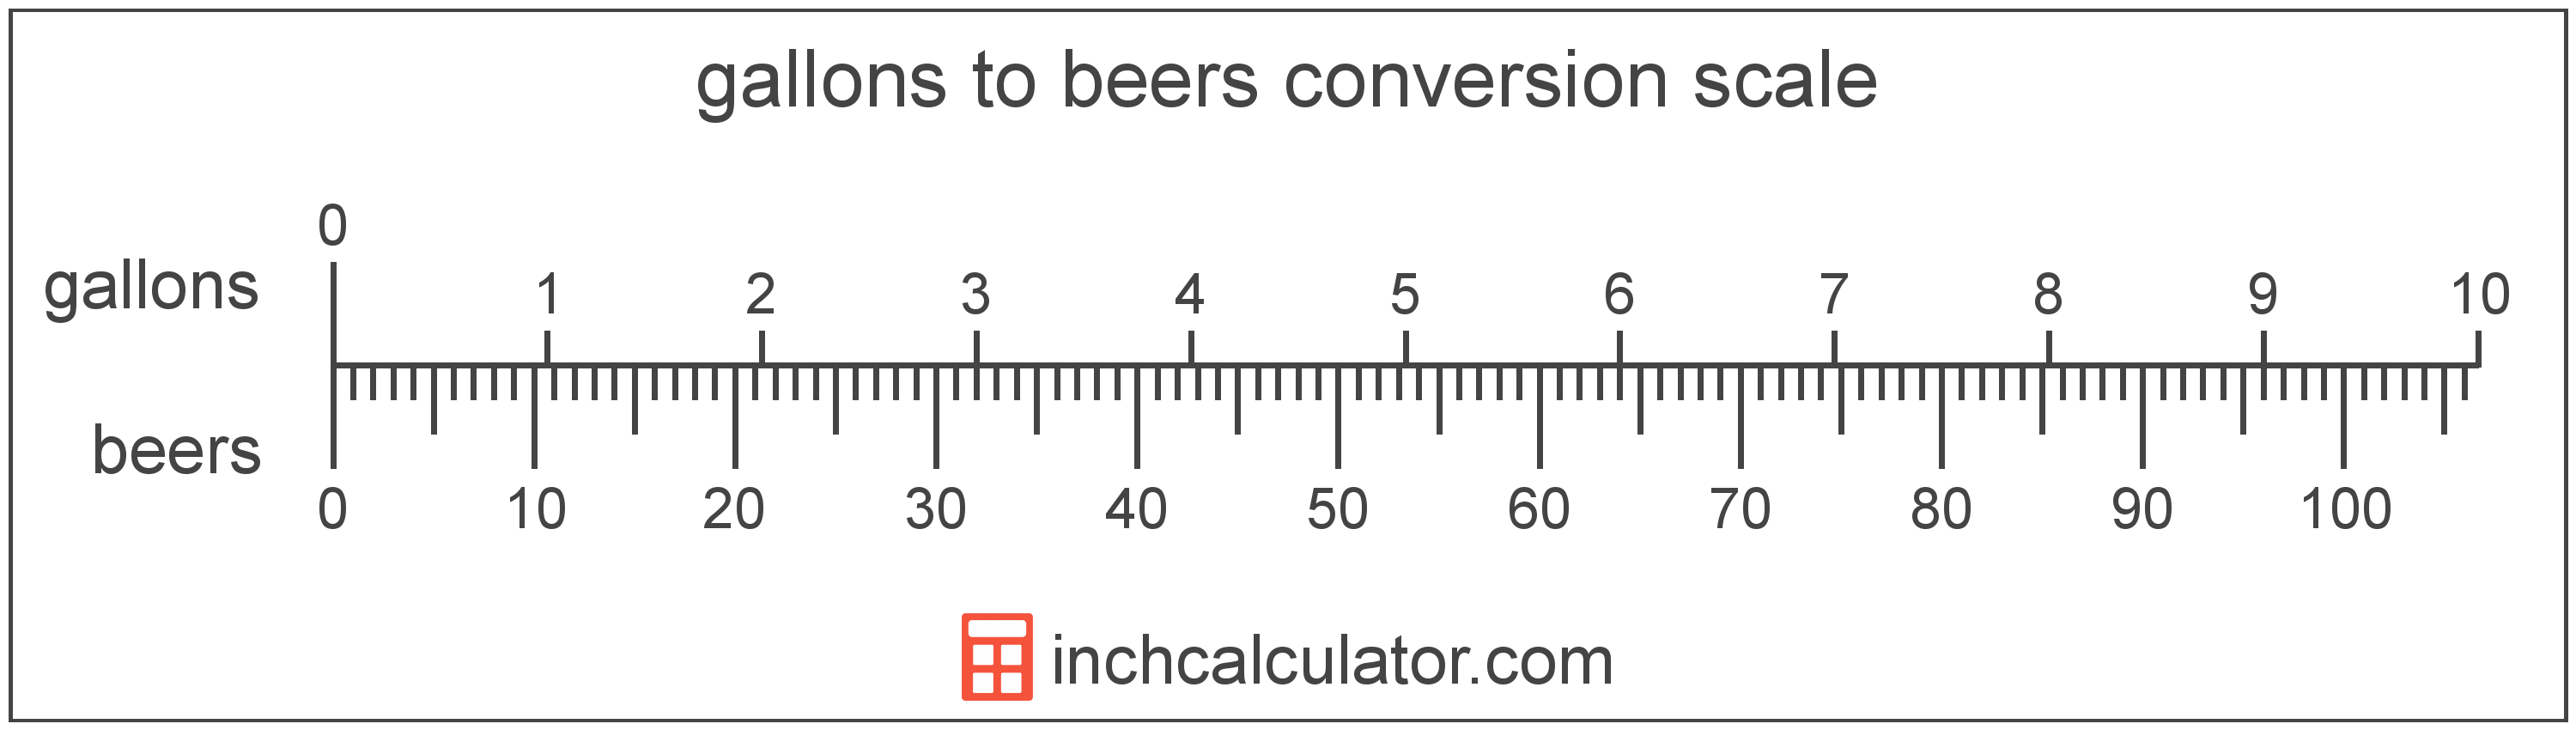 conversion scale showing beers and equivalent gallons beer volume values